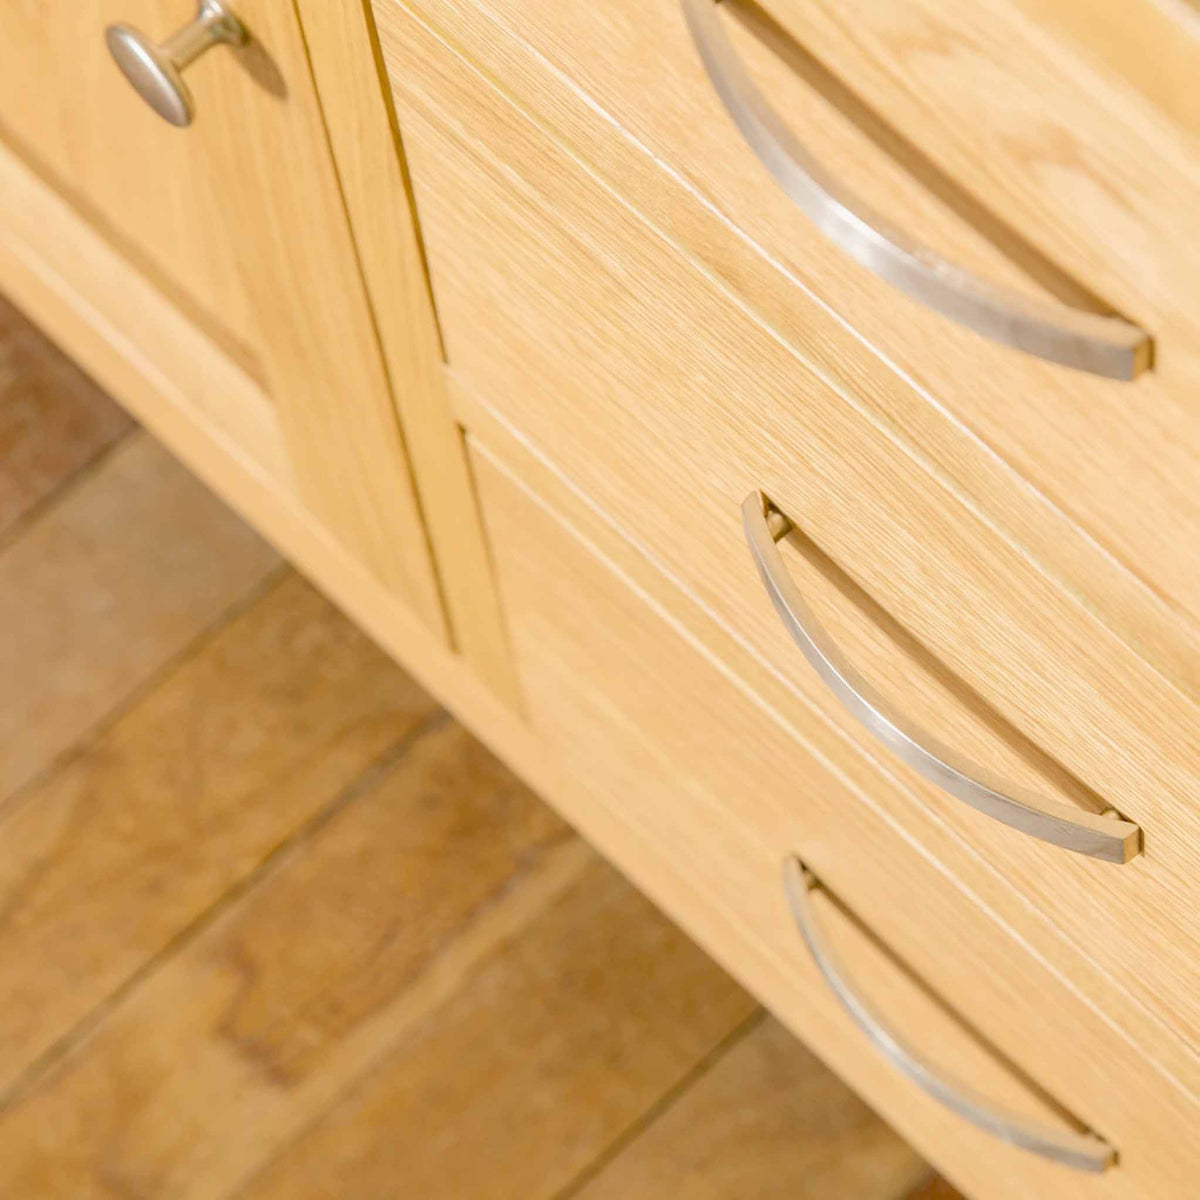 London Oak 3 Drawer Sideboard - Looking down at drawer fronts